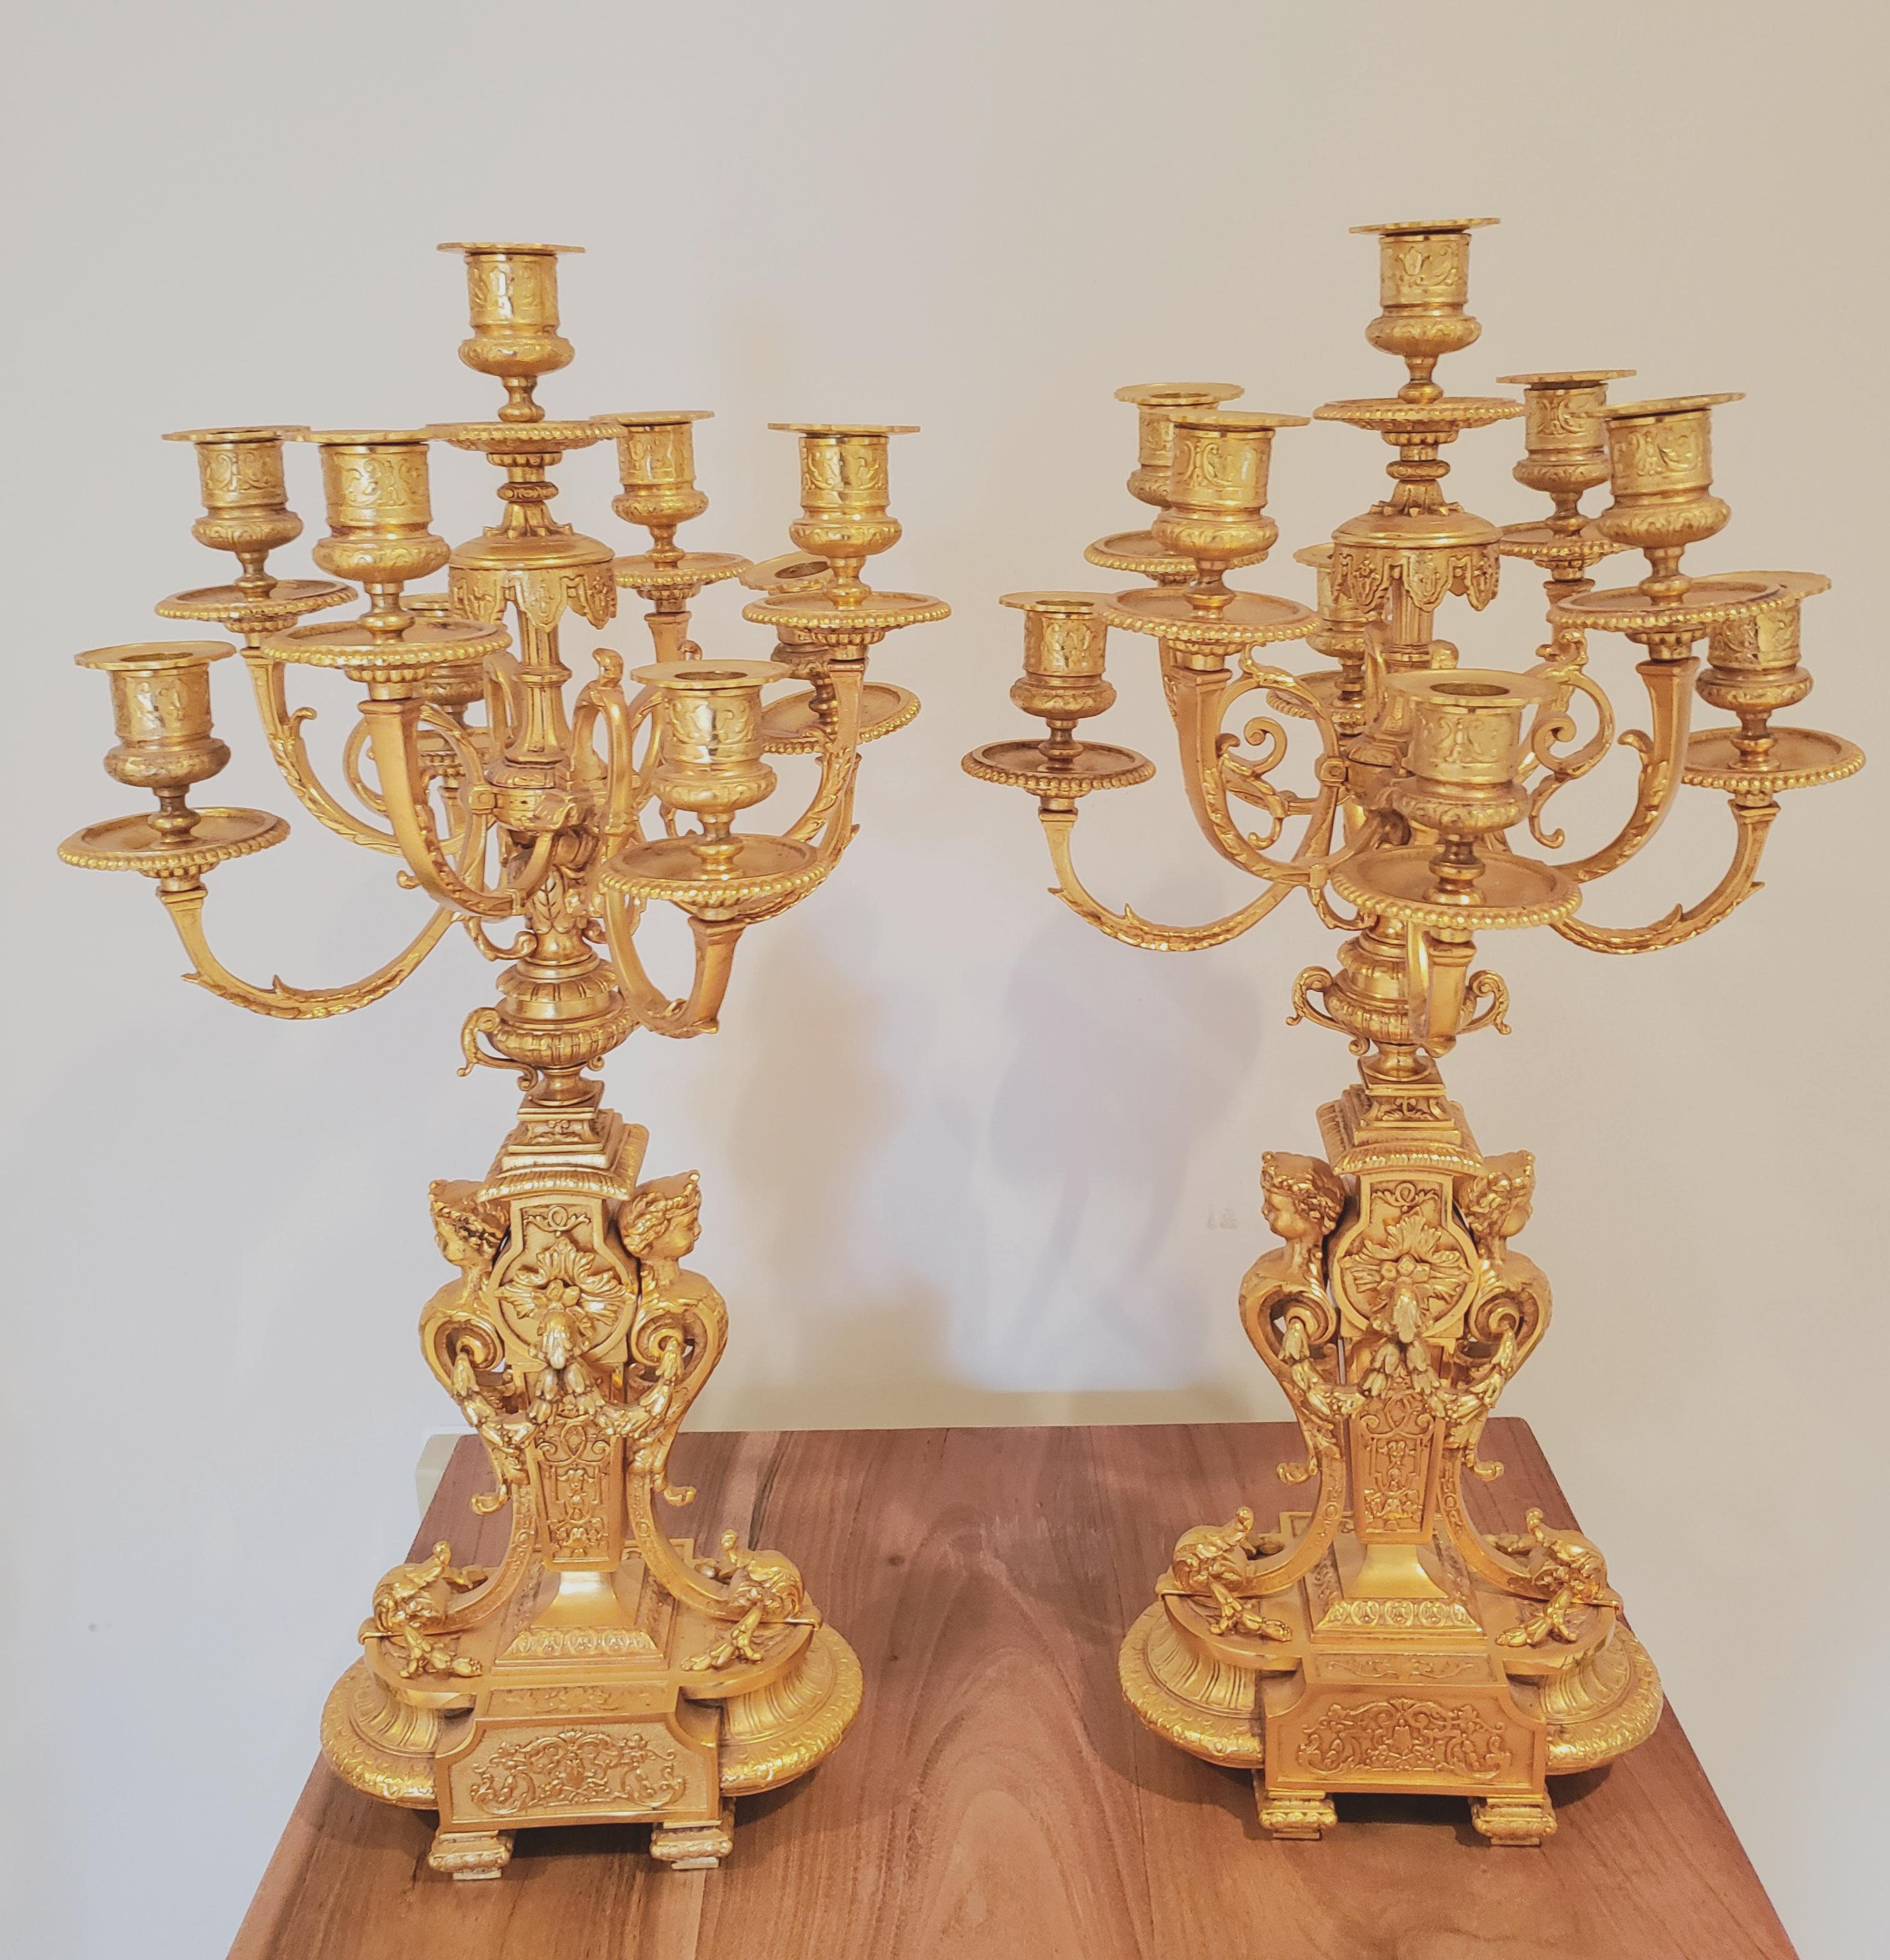 Fonderia Bronzi Artistici Italy (FBAI) 9-Candle candelabra in hand-cast bronze plated in 24k gold in very good condition. 
Measures 13 inches wide by 13 inches deep by 24 inches tall. These Candelabras are heavy and weight 42 pounds This is the